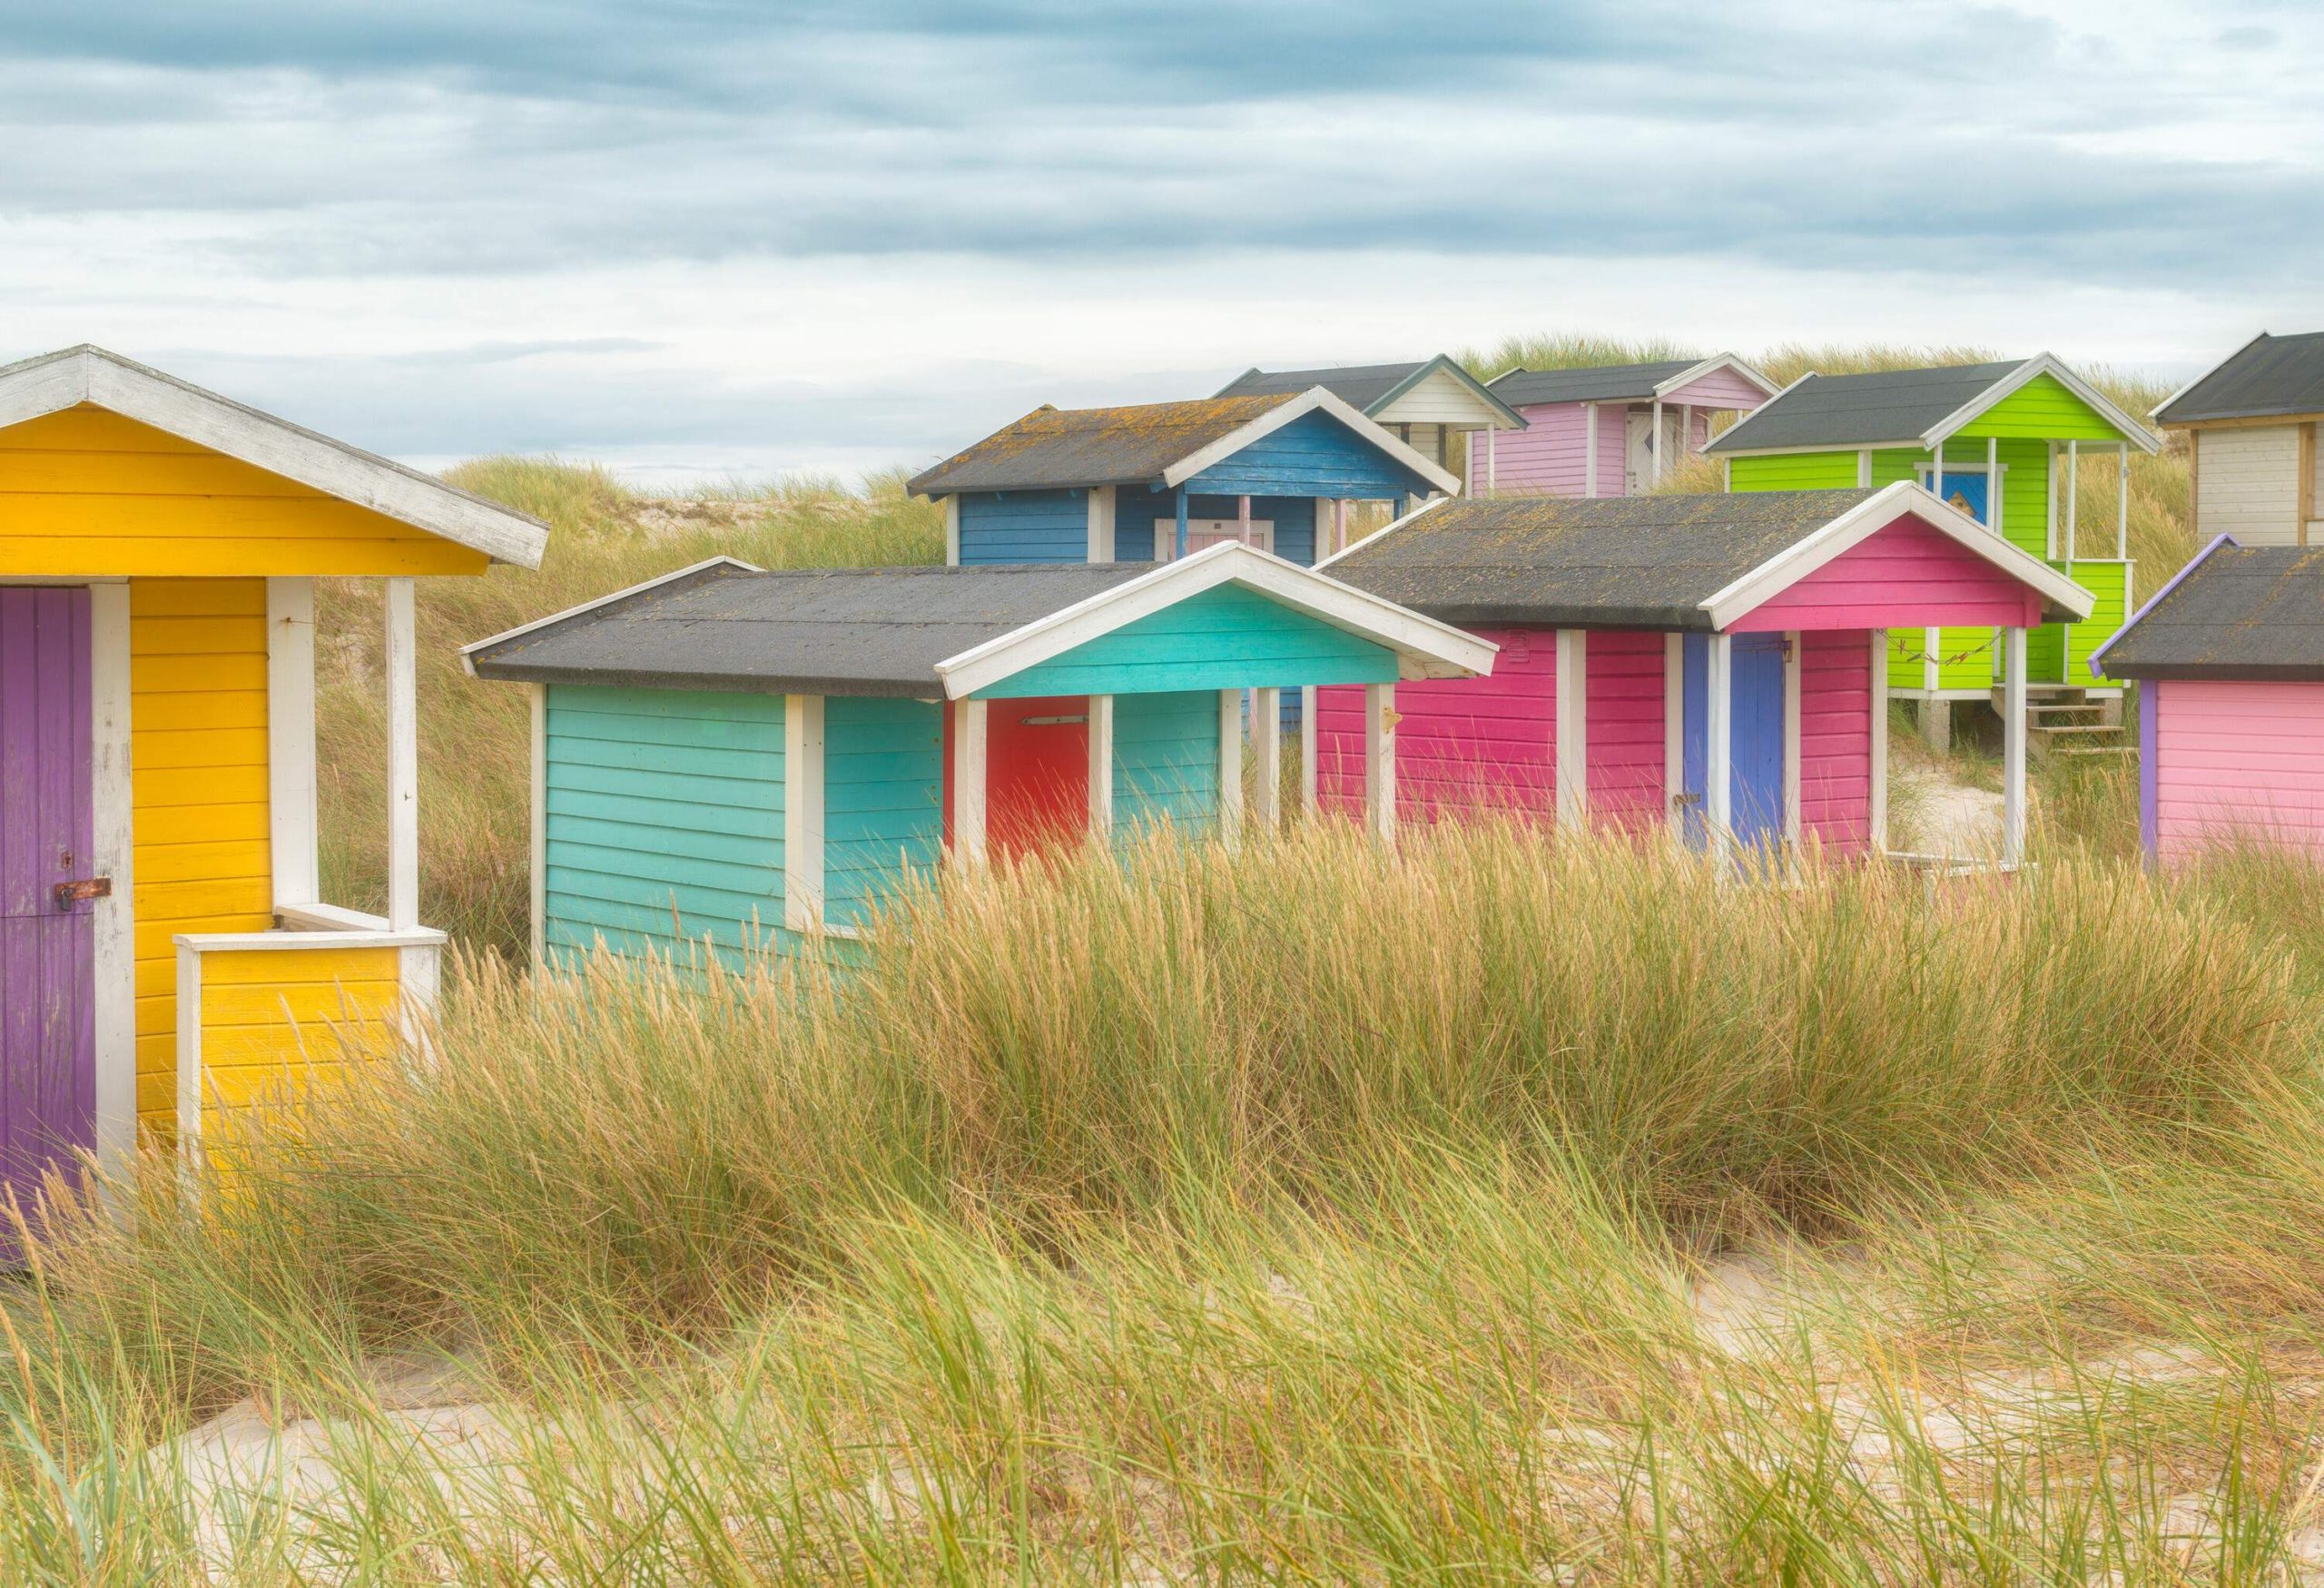 Brightly coloured wooden cabins scattered across a grassy beach.